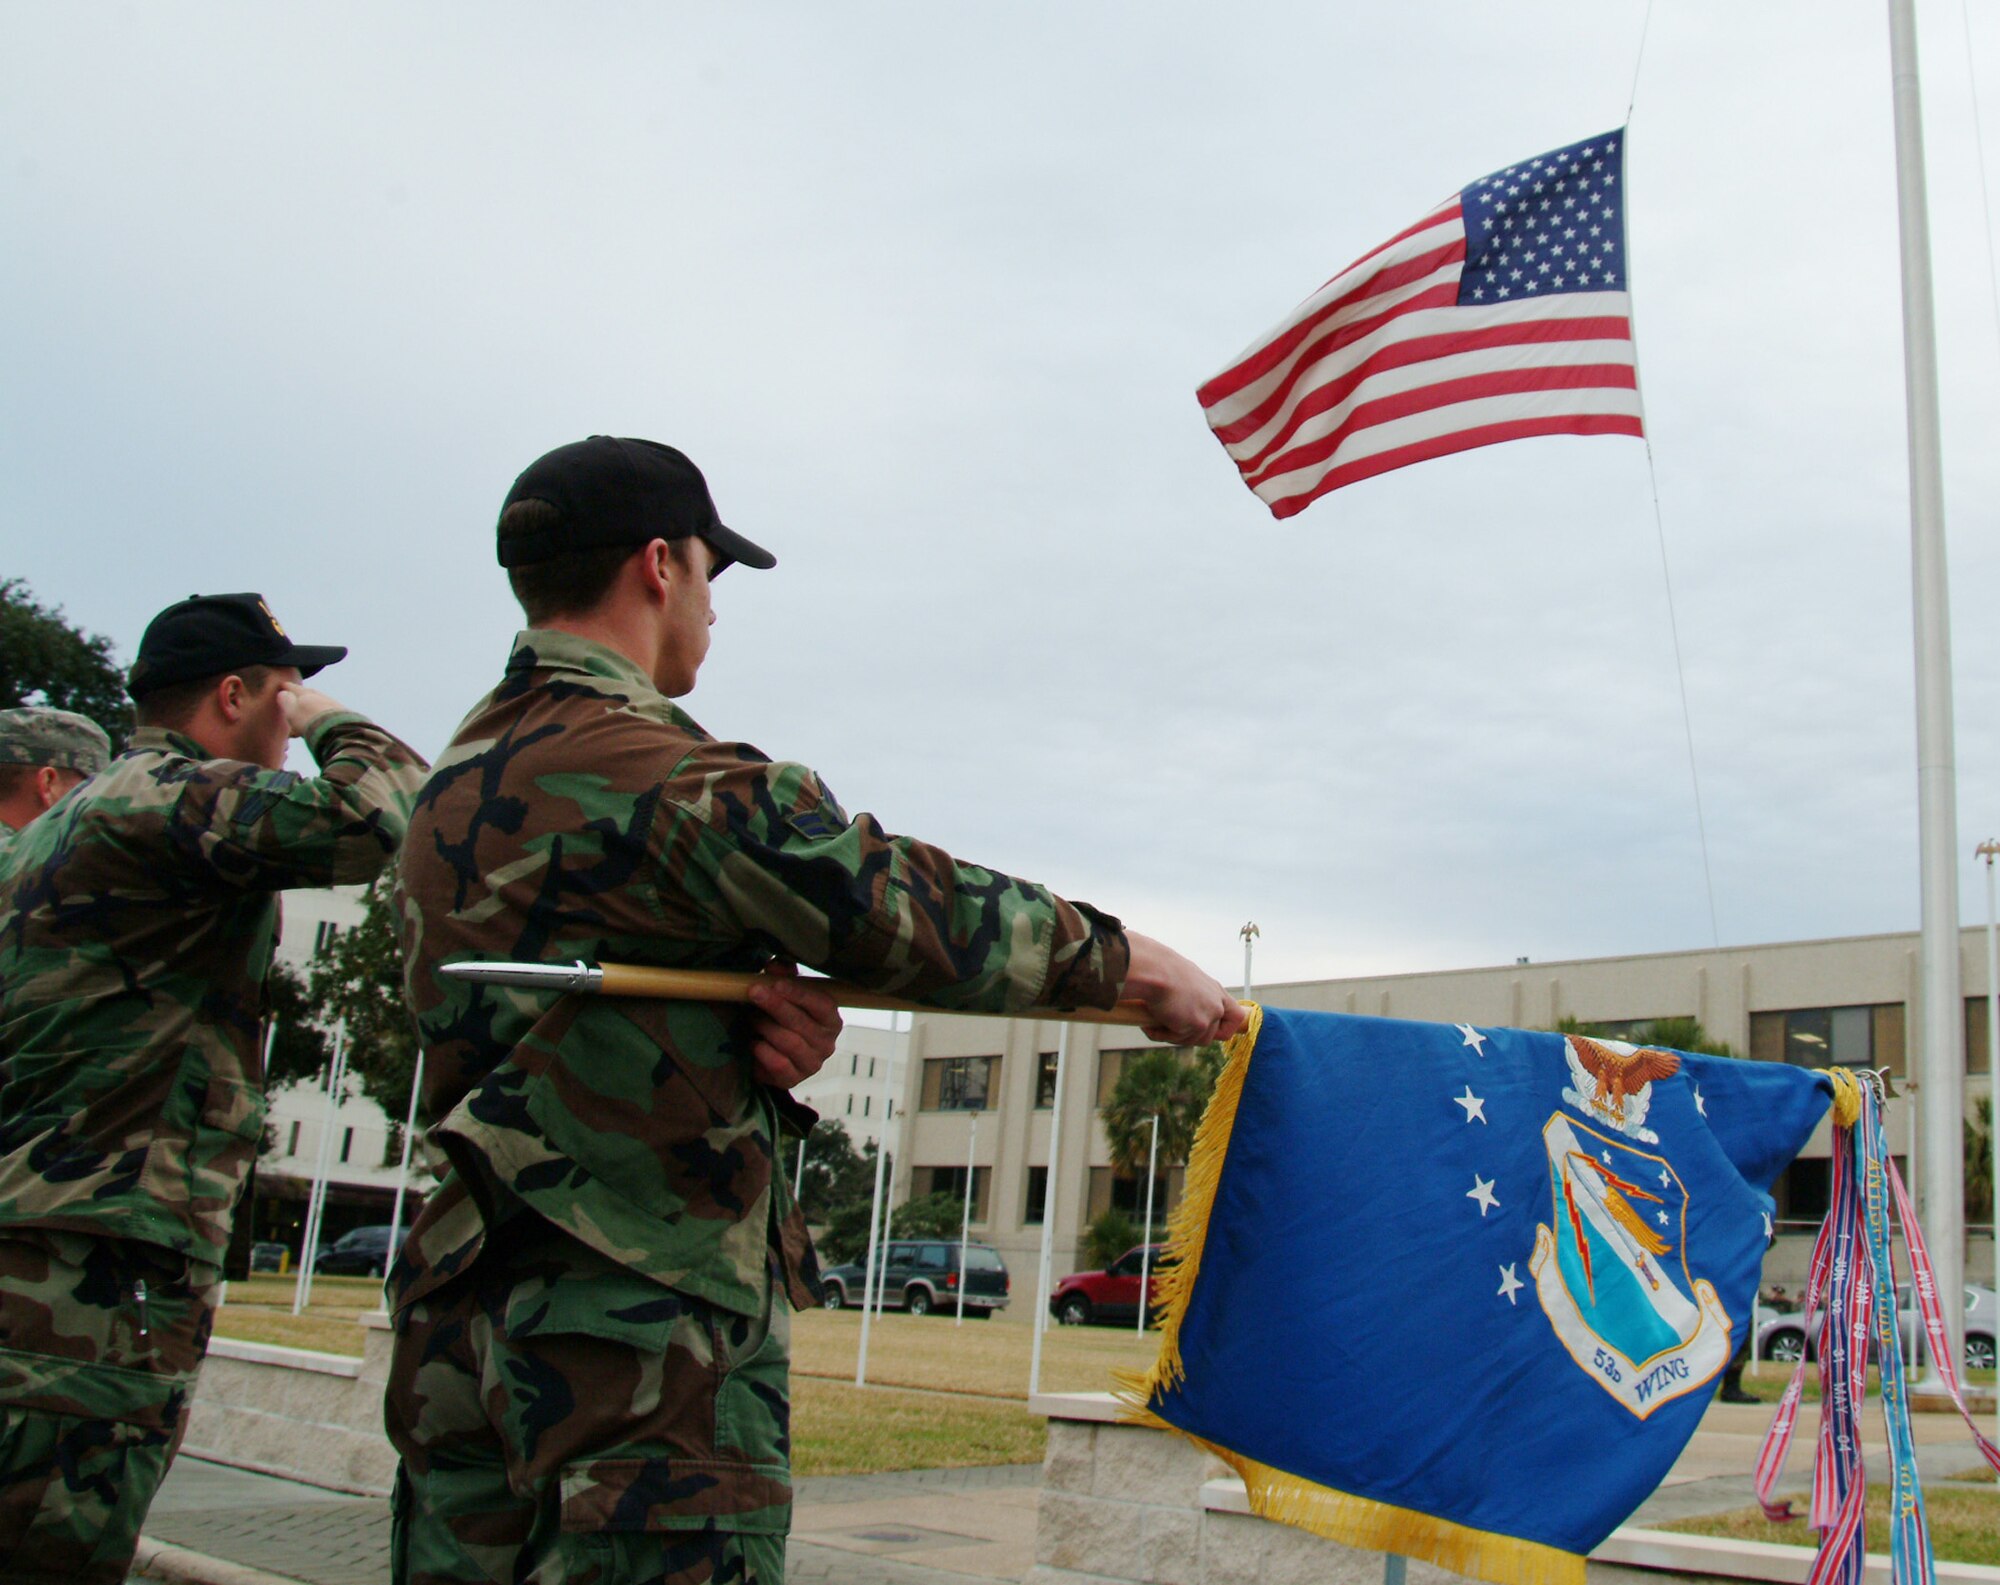 Airman 1st Class Robert Blackmon, 68th Electronic Warfare Squadron, presents the guidon while the base flag is lowered during the retreat ceremony held Jan. 24 at Eglin Air Force Base, Fla.  More than 135 53d Wing members participated in the ceremony. 